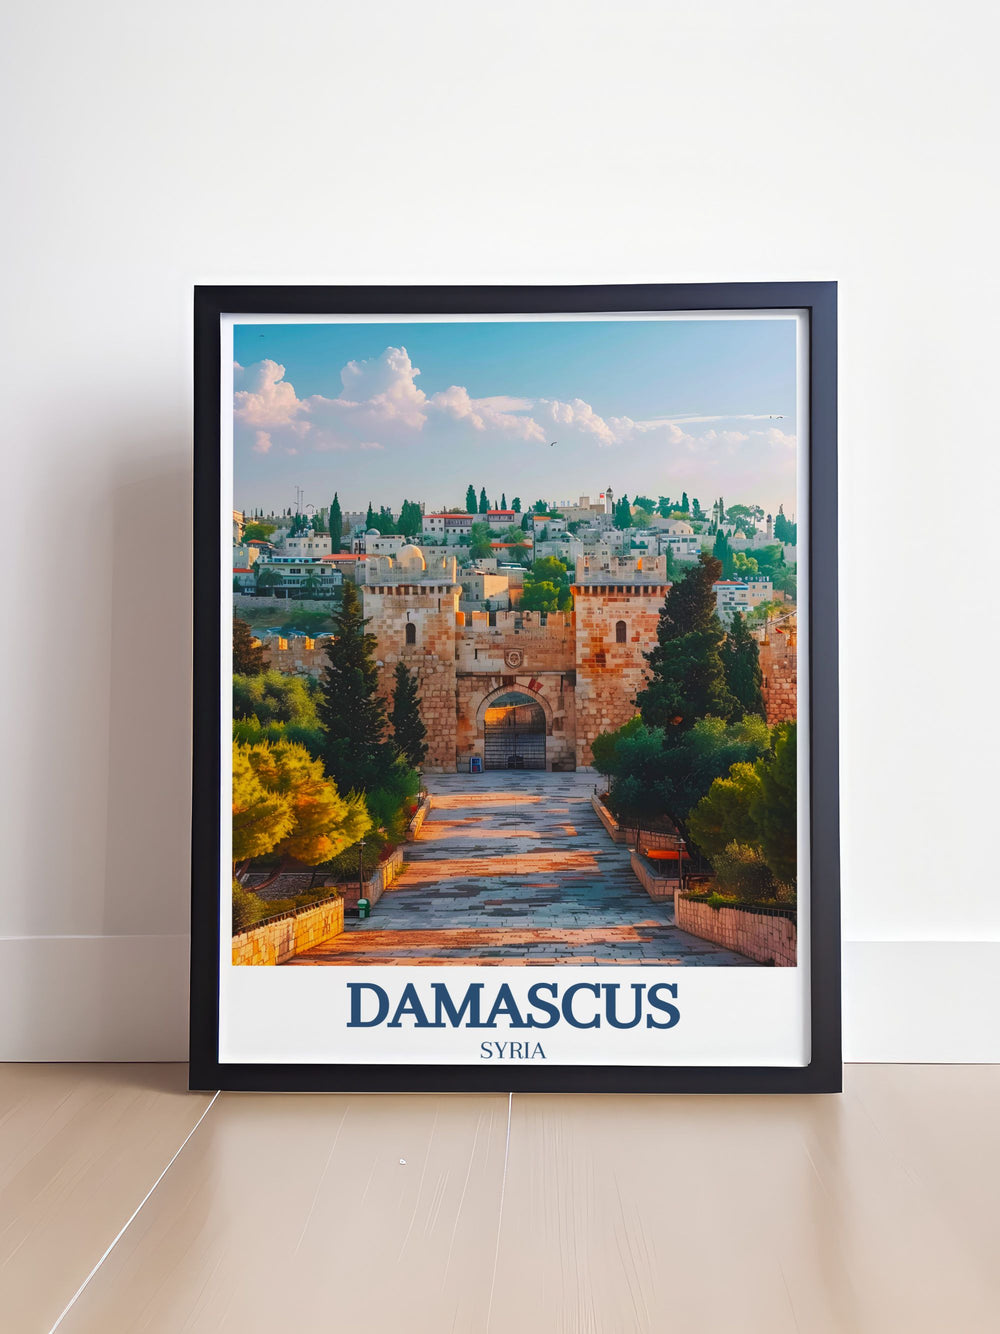 A vibrant print of Damascus featuring the historic Bab al Amara, perfect for adding a touch of Middle Eastern charm to your decor.